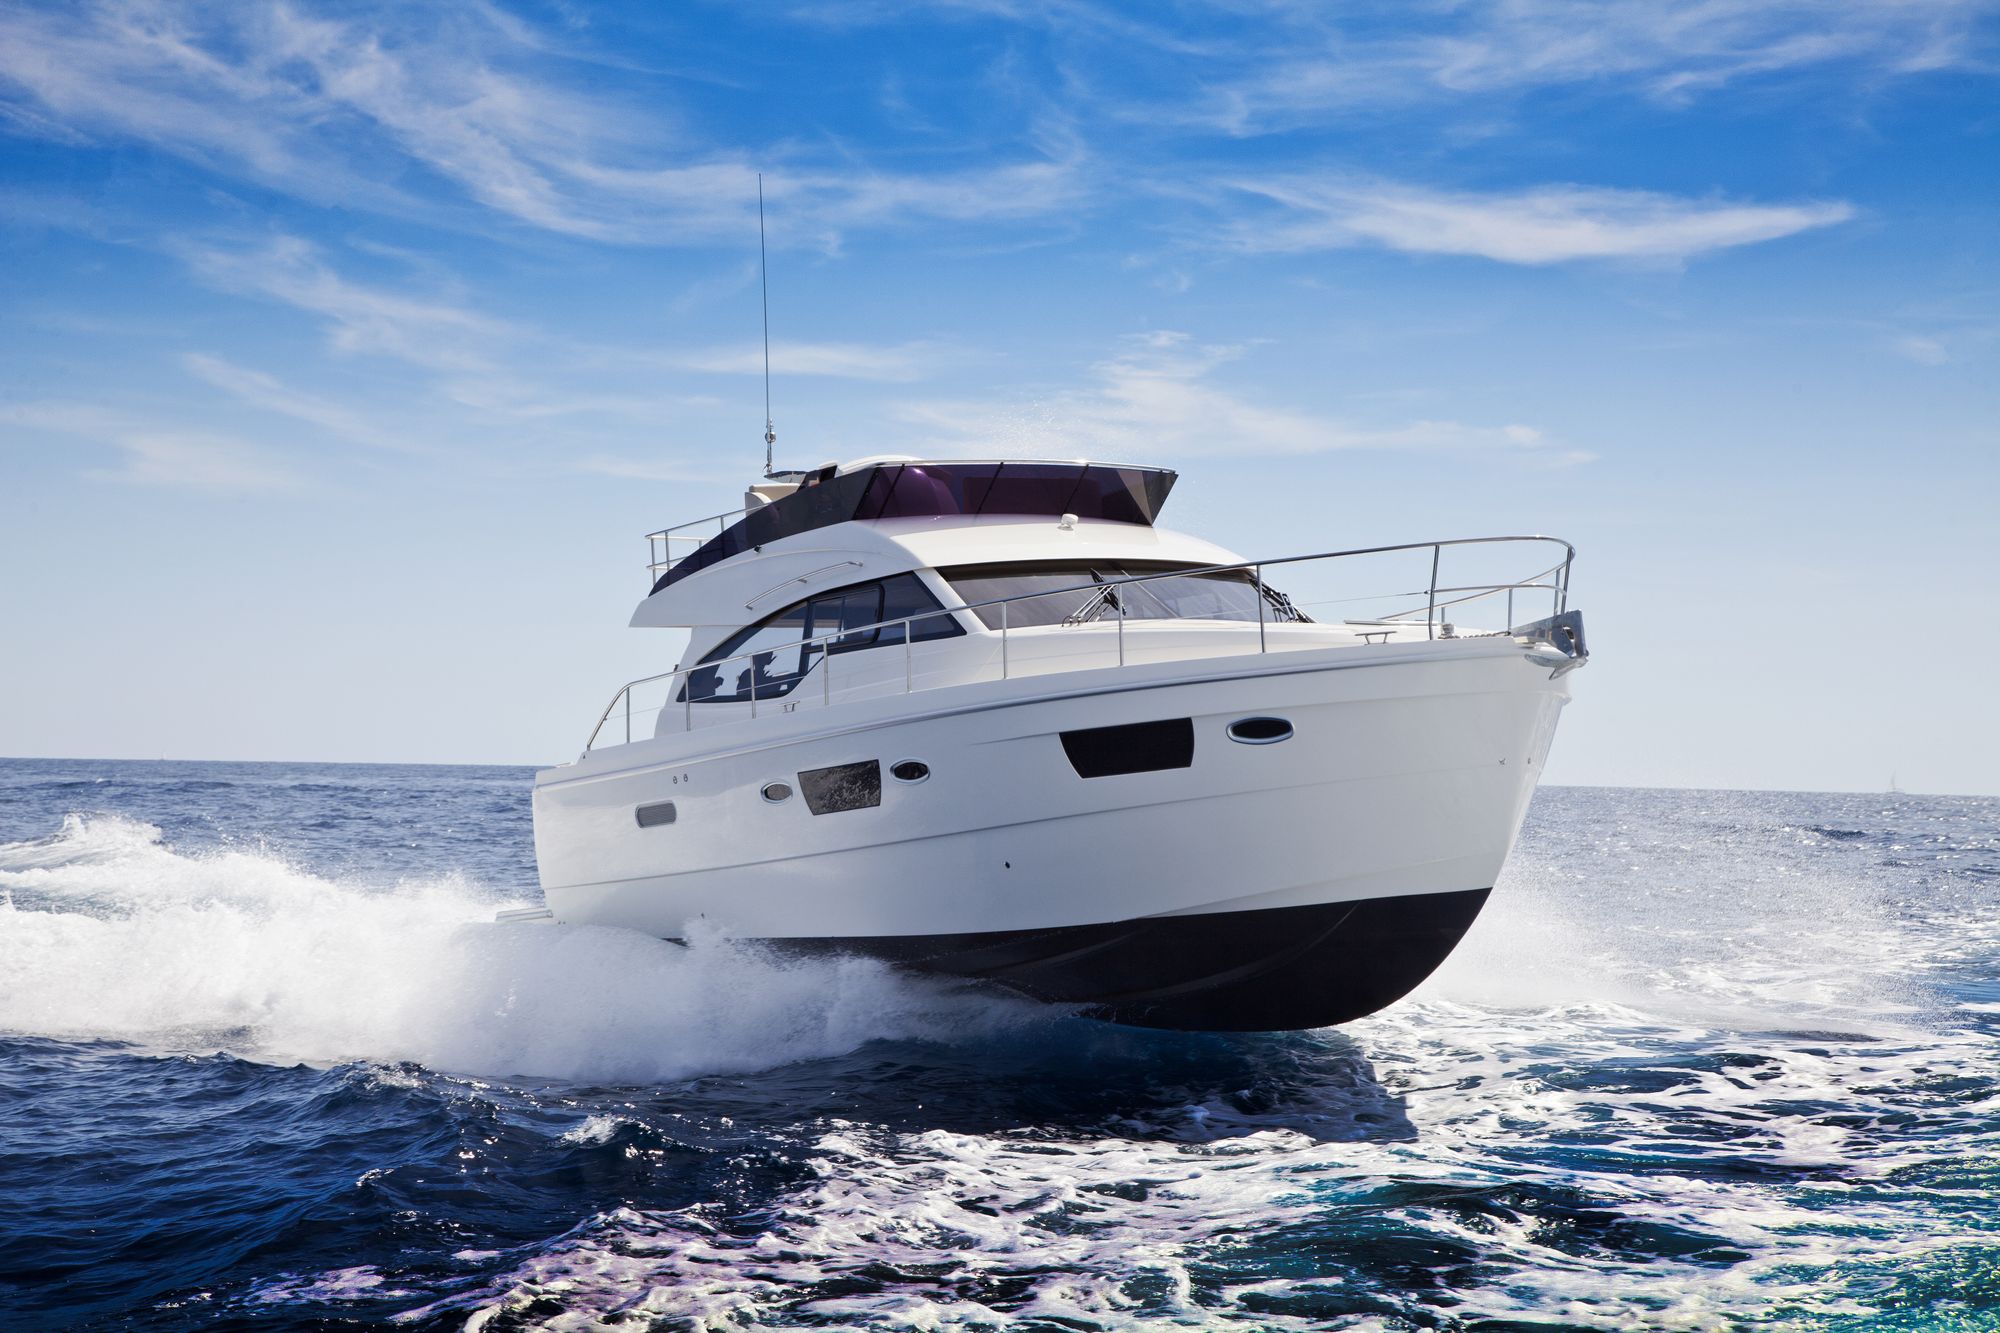 Charter a Motor yacht. What you should know?